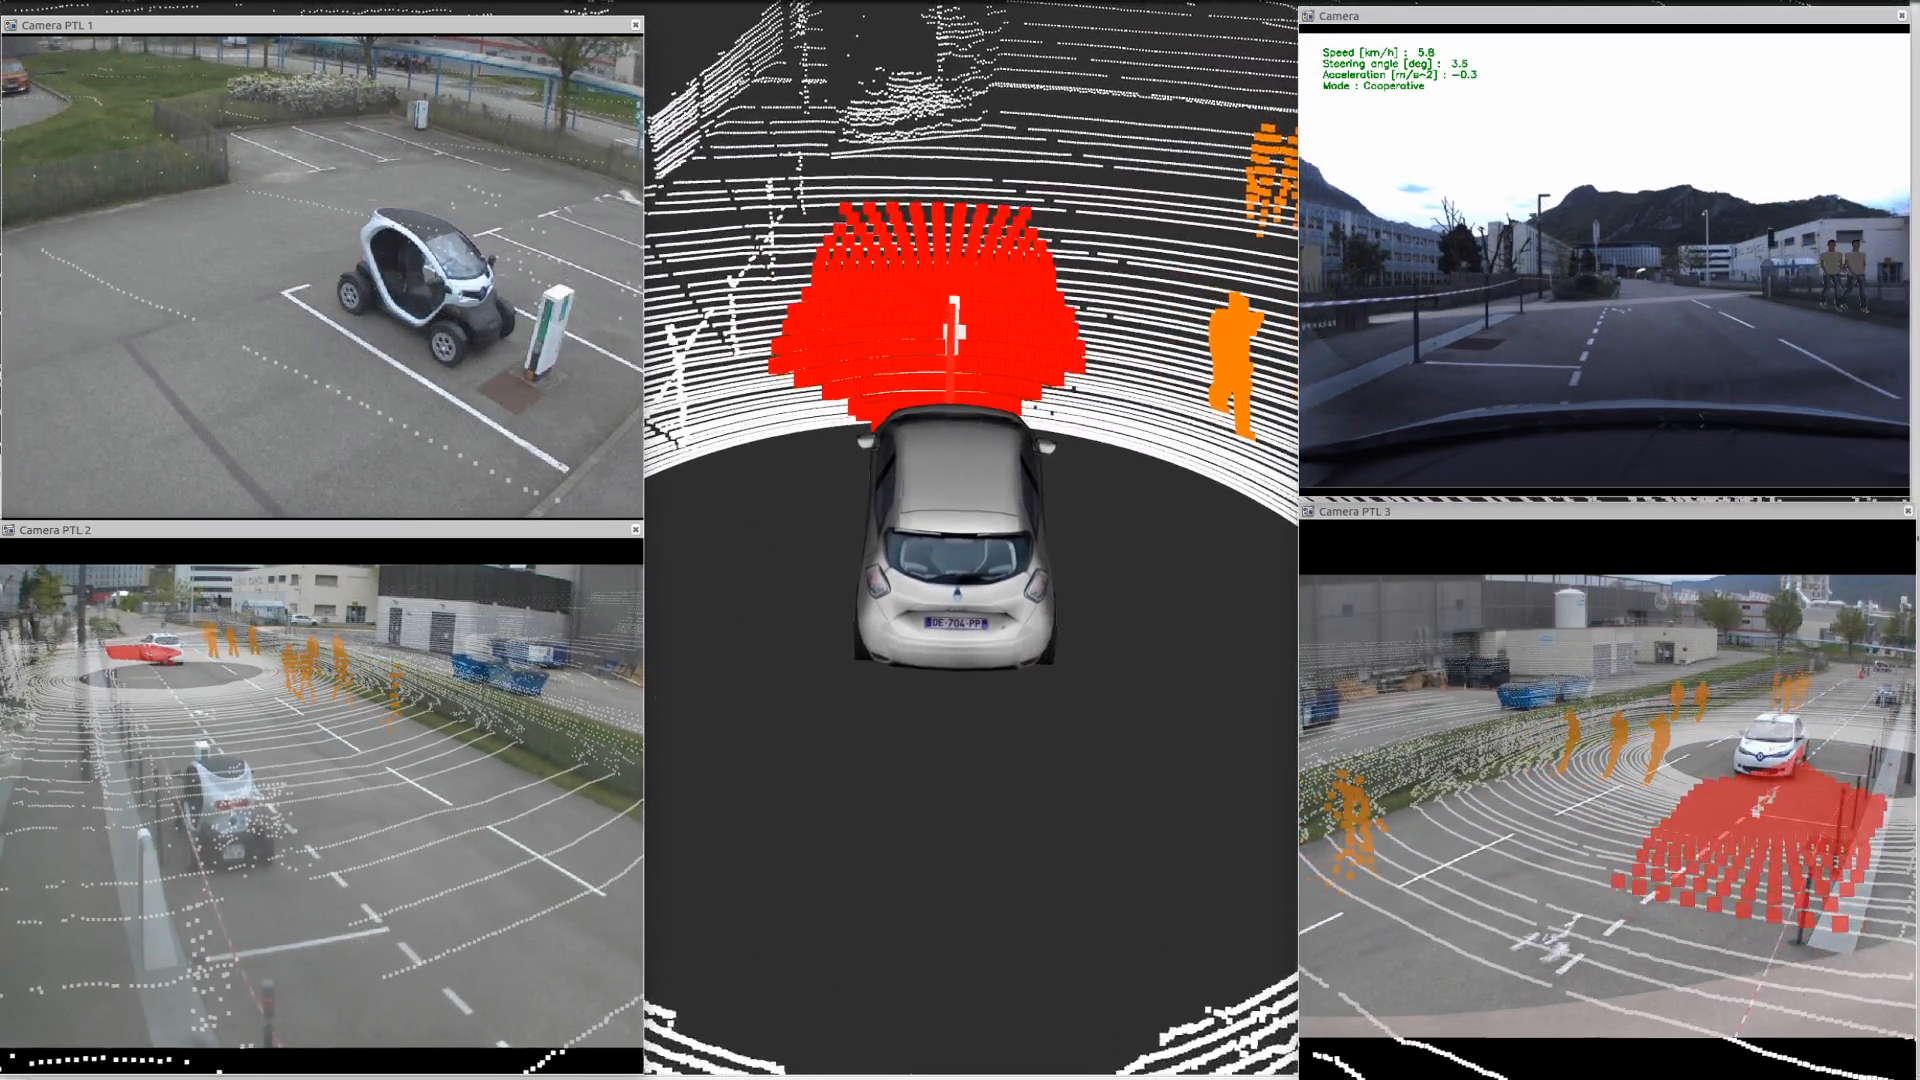 Presentation of the tools used to analyze the behavior of the experimental vehicle during an augmented reality test.